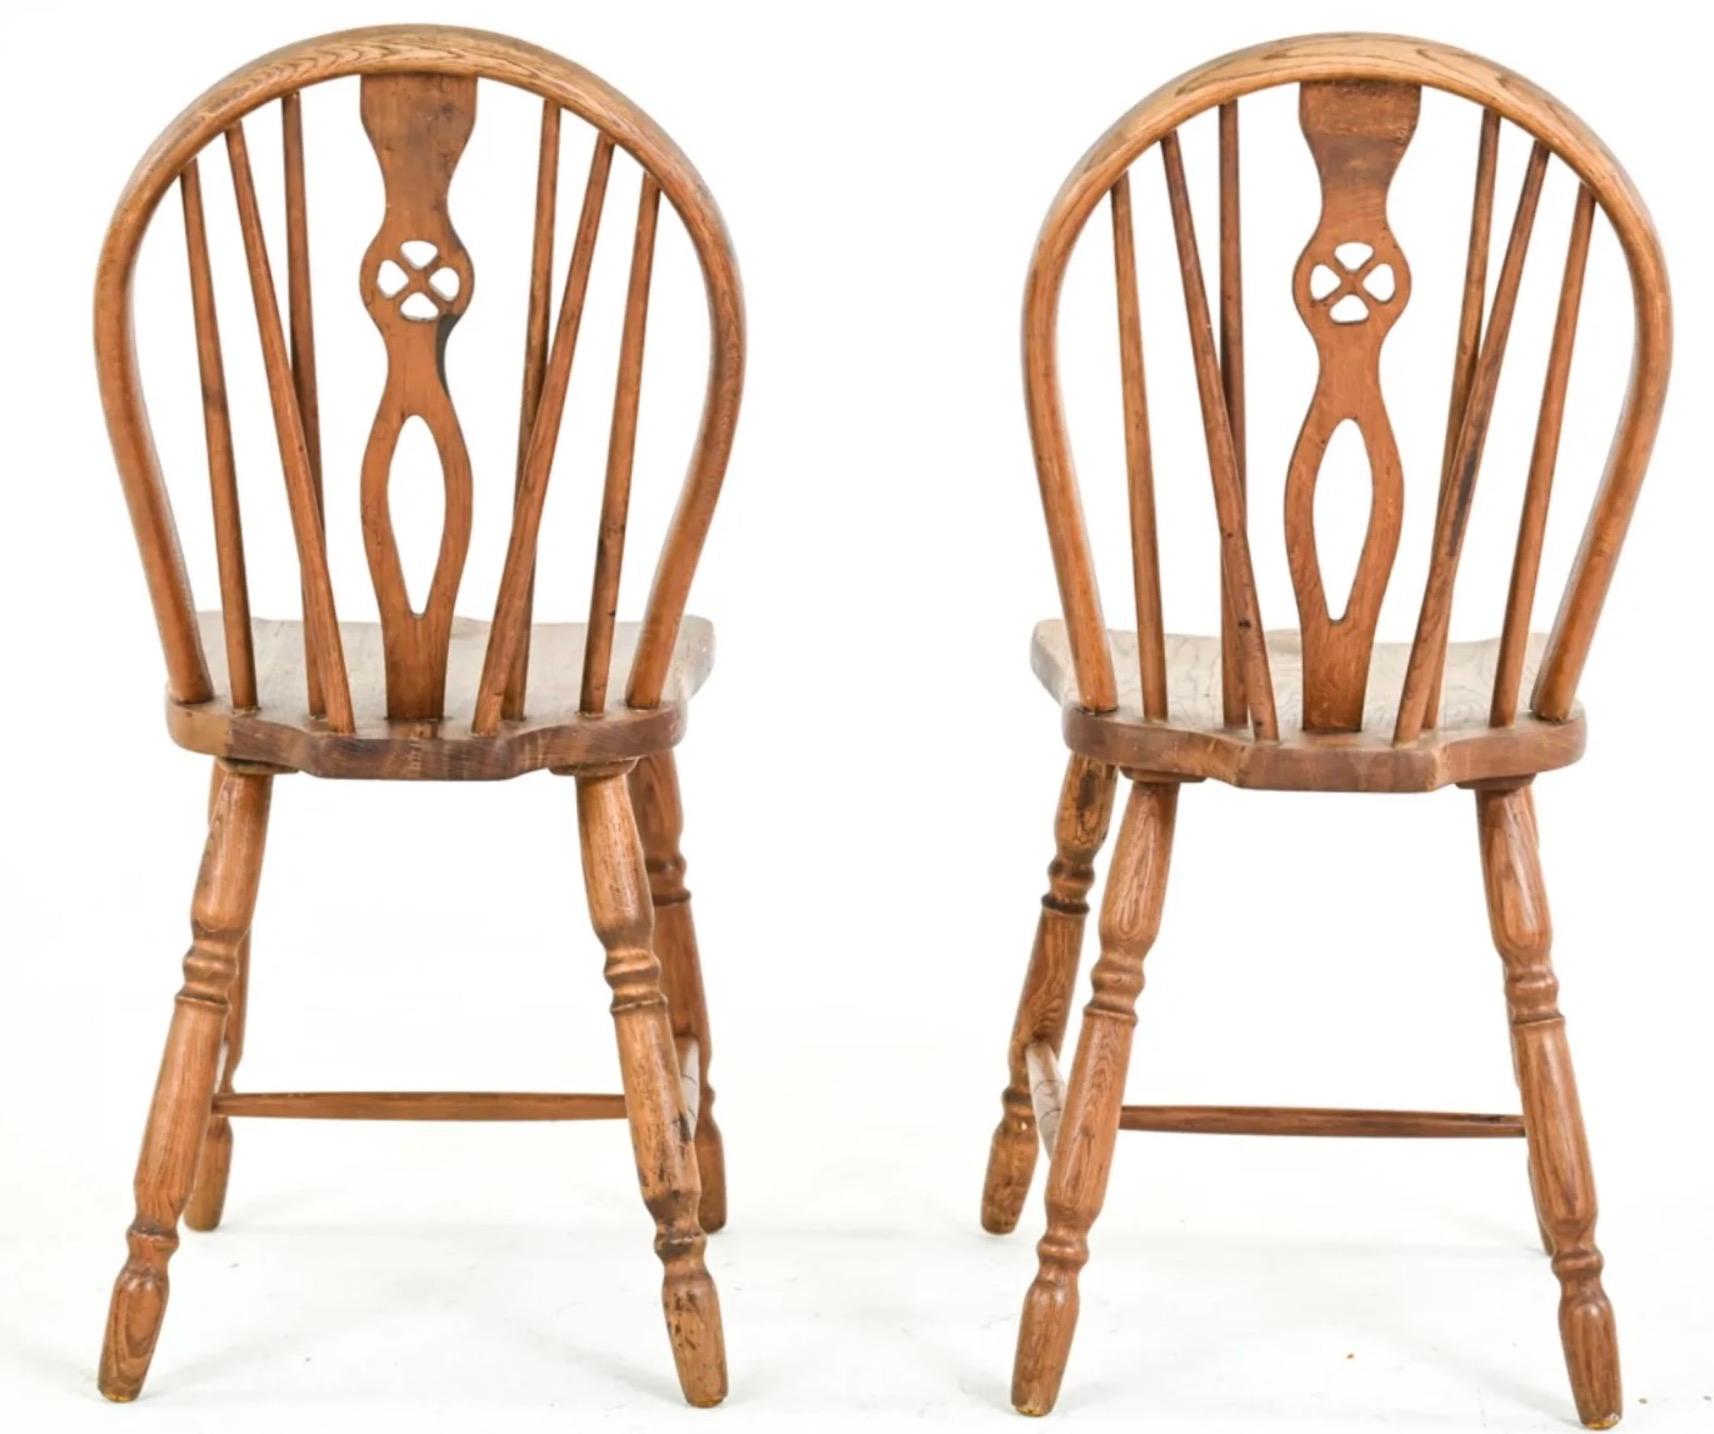 Hand-Crafted Set of 4 Yew Wood Windsor Style Dining Side Chairs For Sale